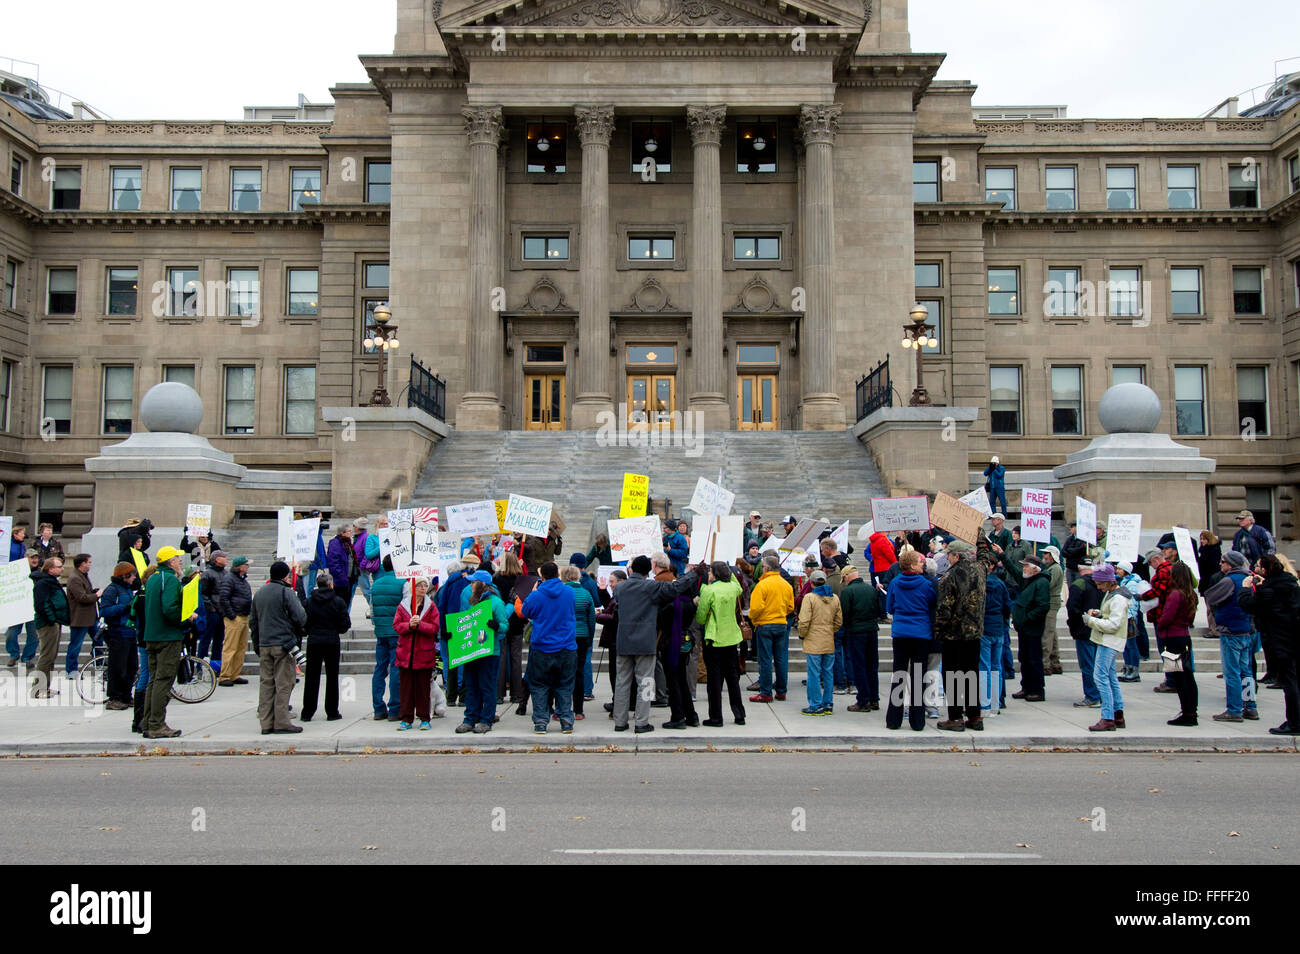 Pro-public lands rally in Boise ID, January 2016 Stock Photo